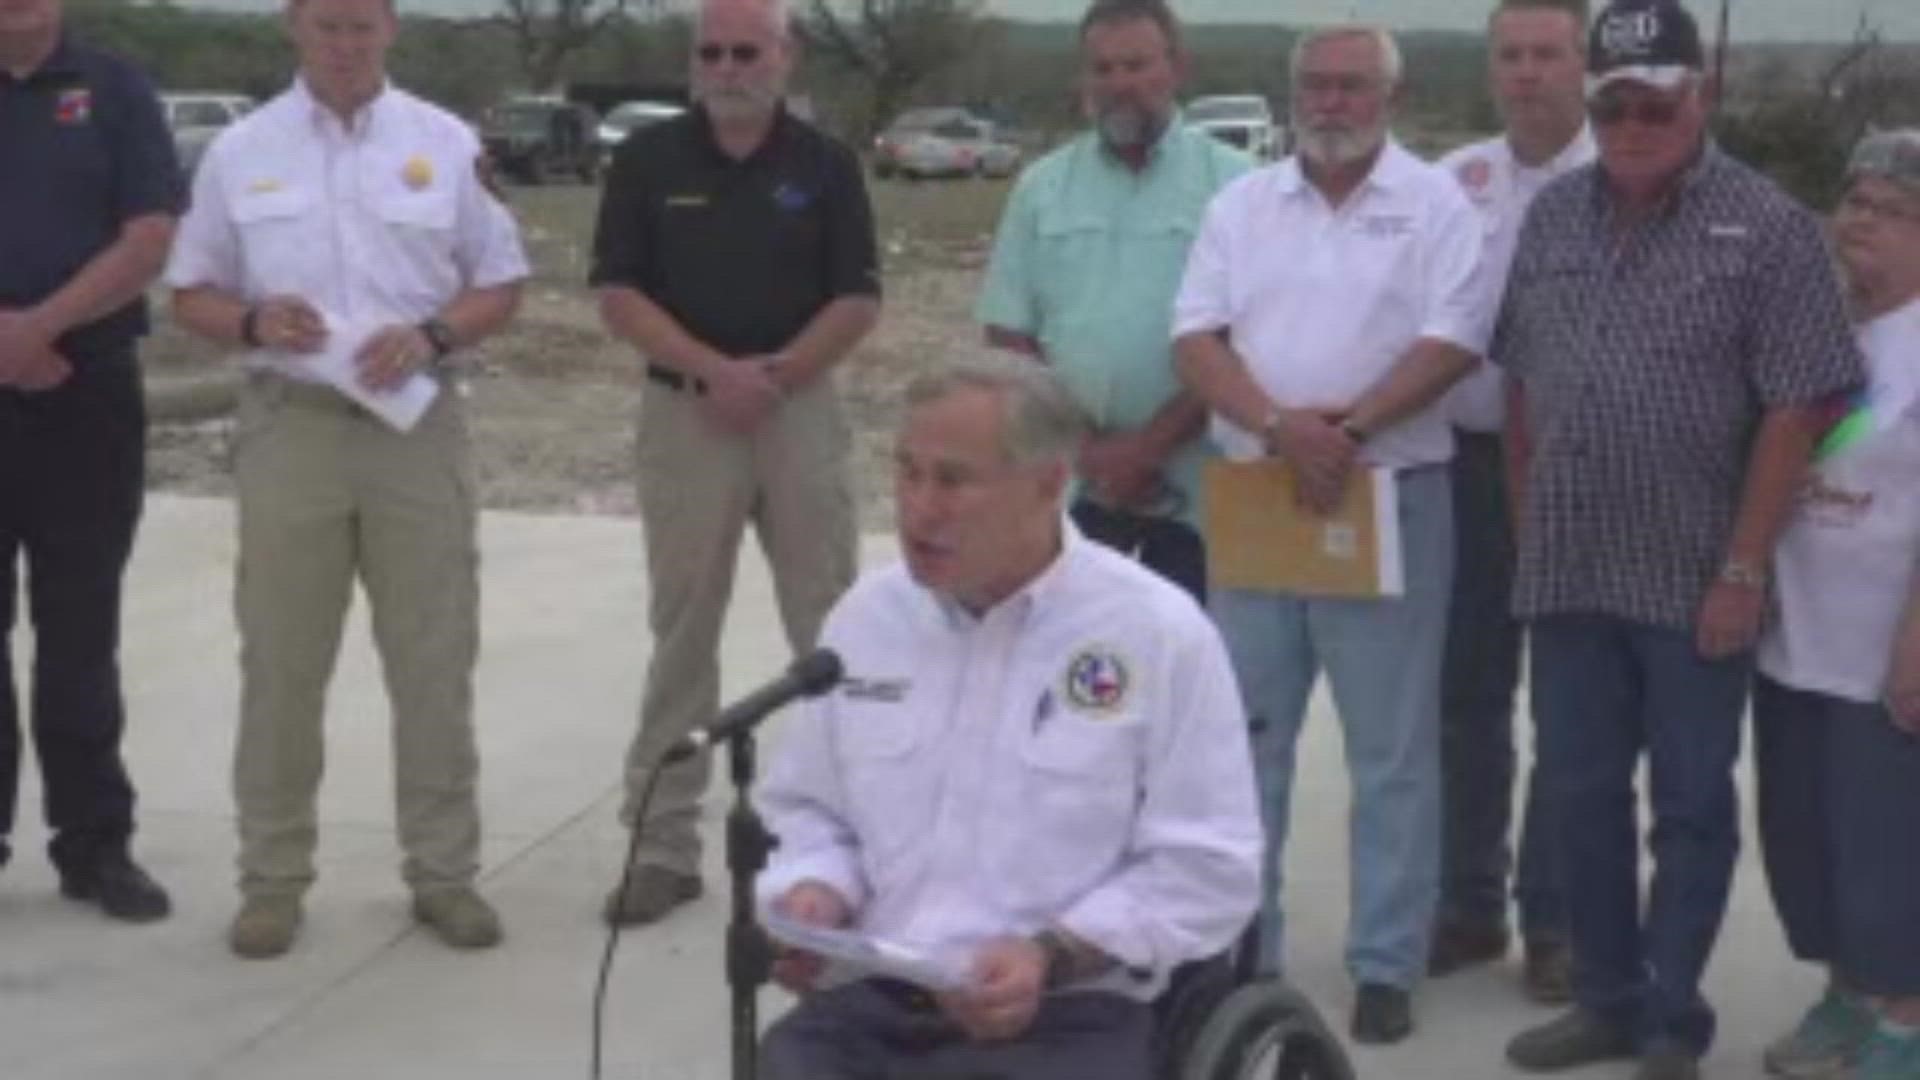 Gov. Abbott tours damage in Salado after town was hit by an EF-3 tornado